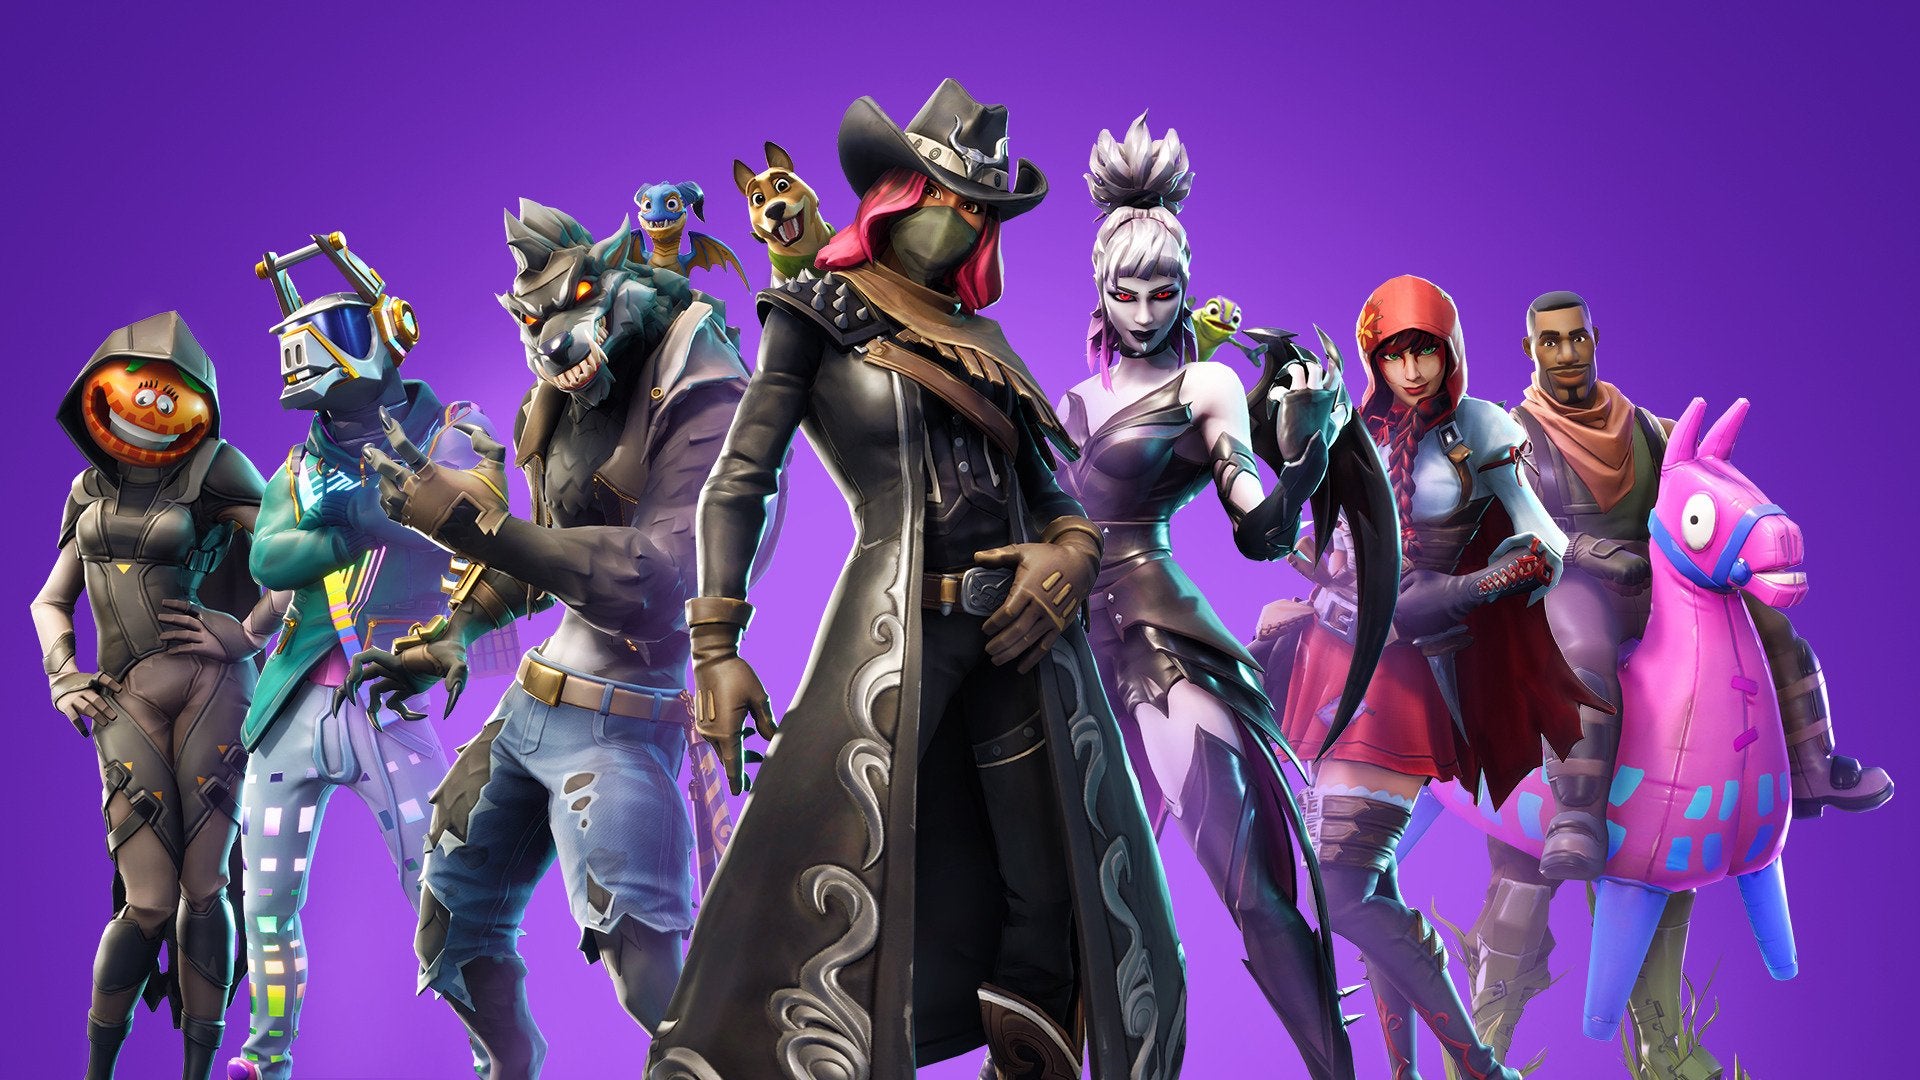 Image for Fortnite Season 6 skins are full-on spooky Halloween outfits